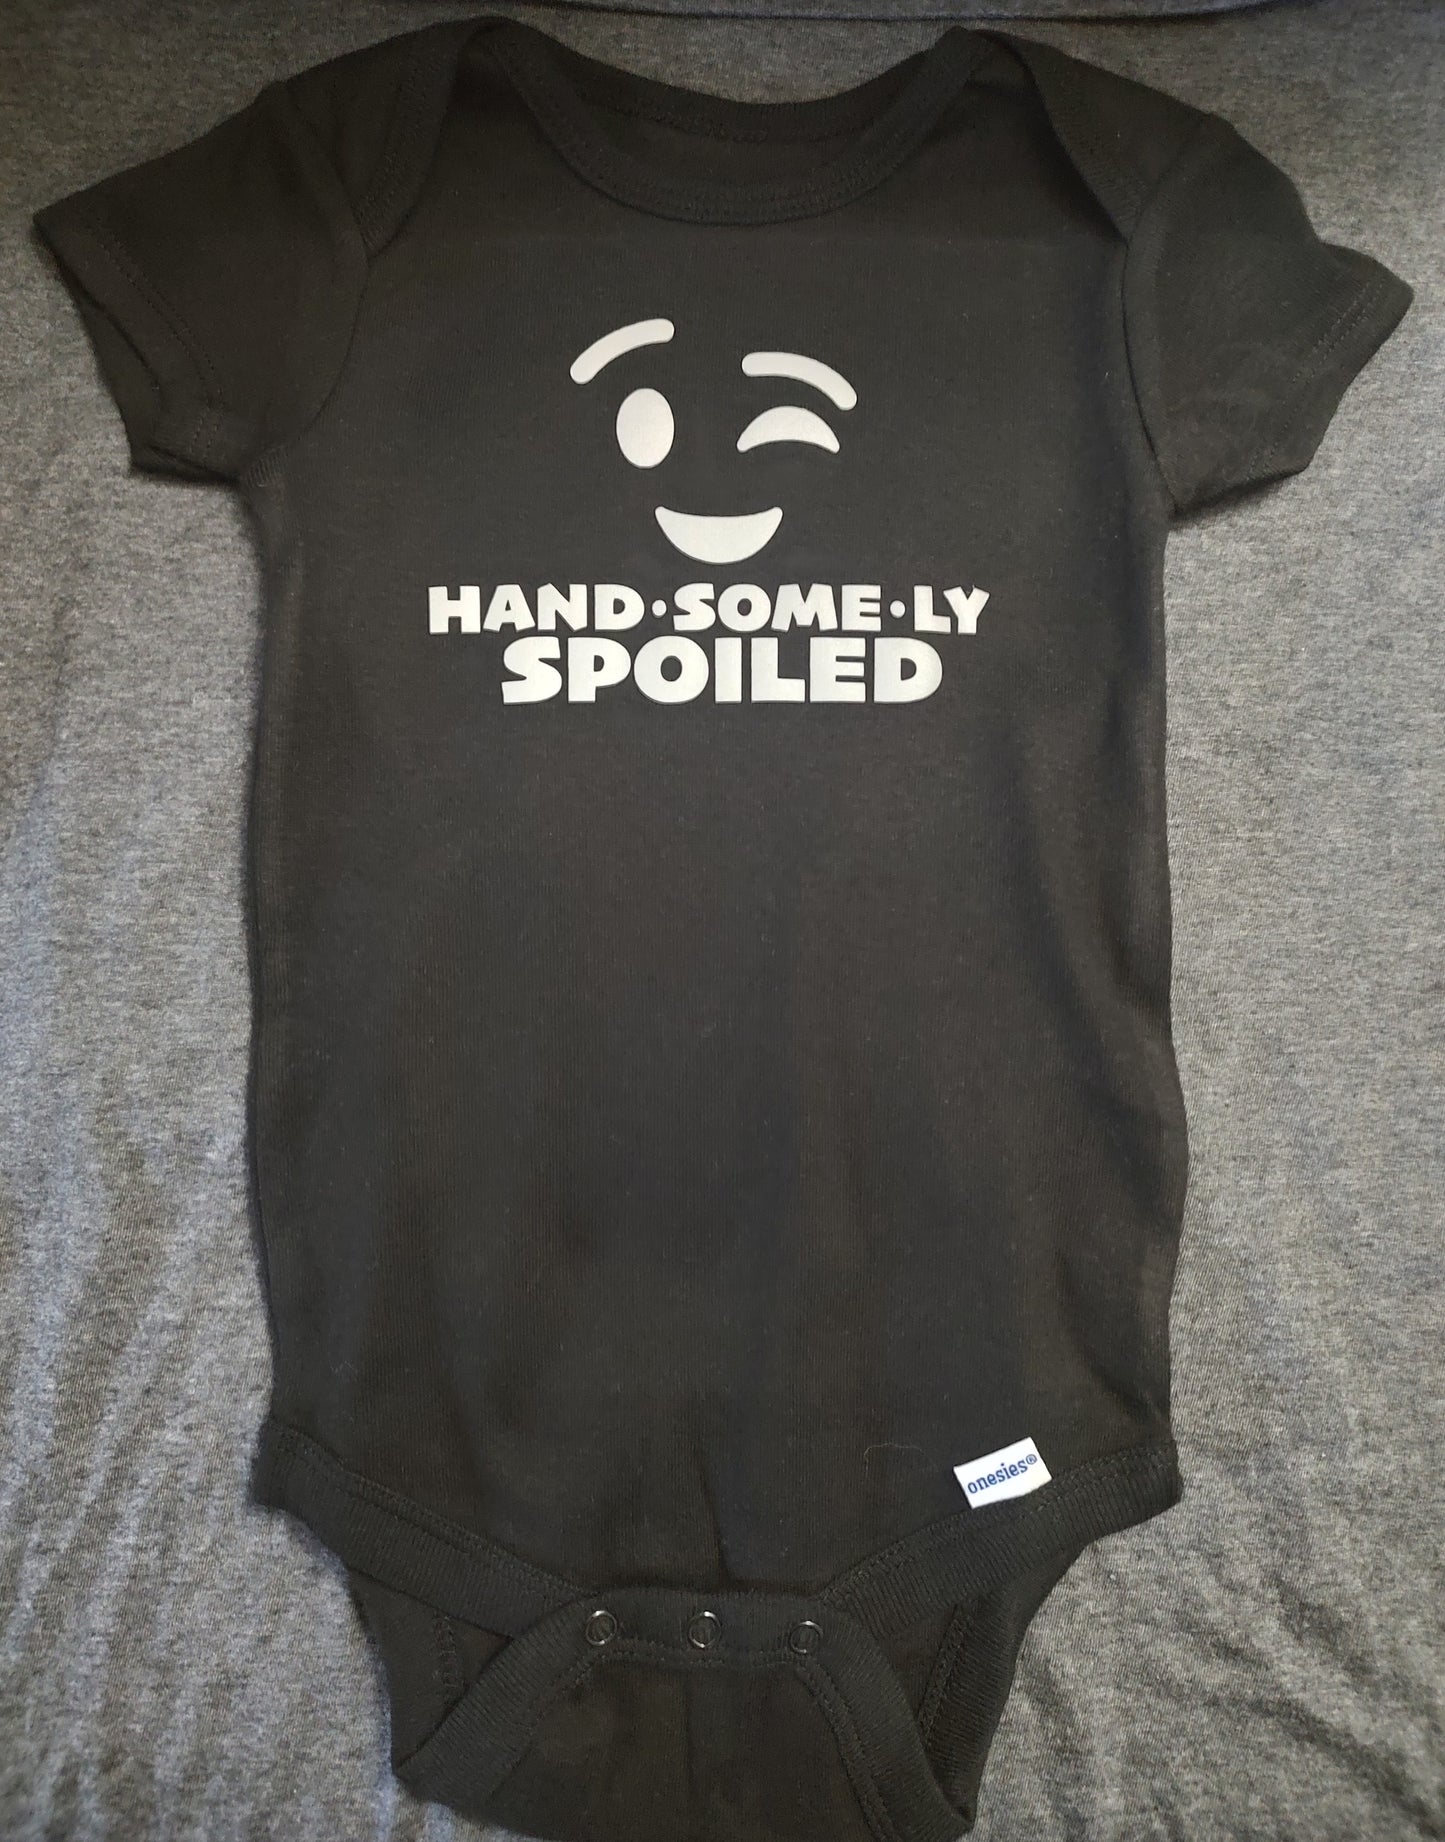 Handsomely Spoiled (Baby Onesie)